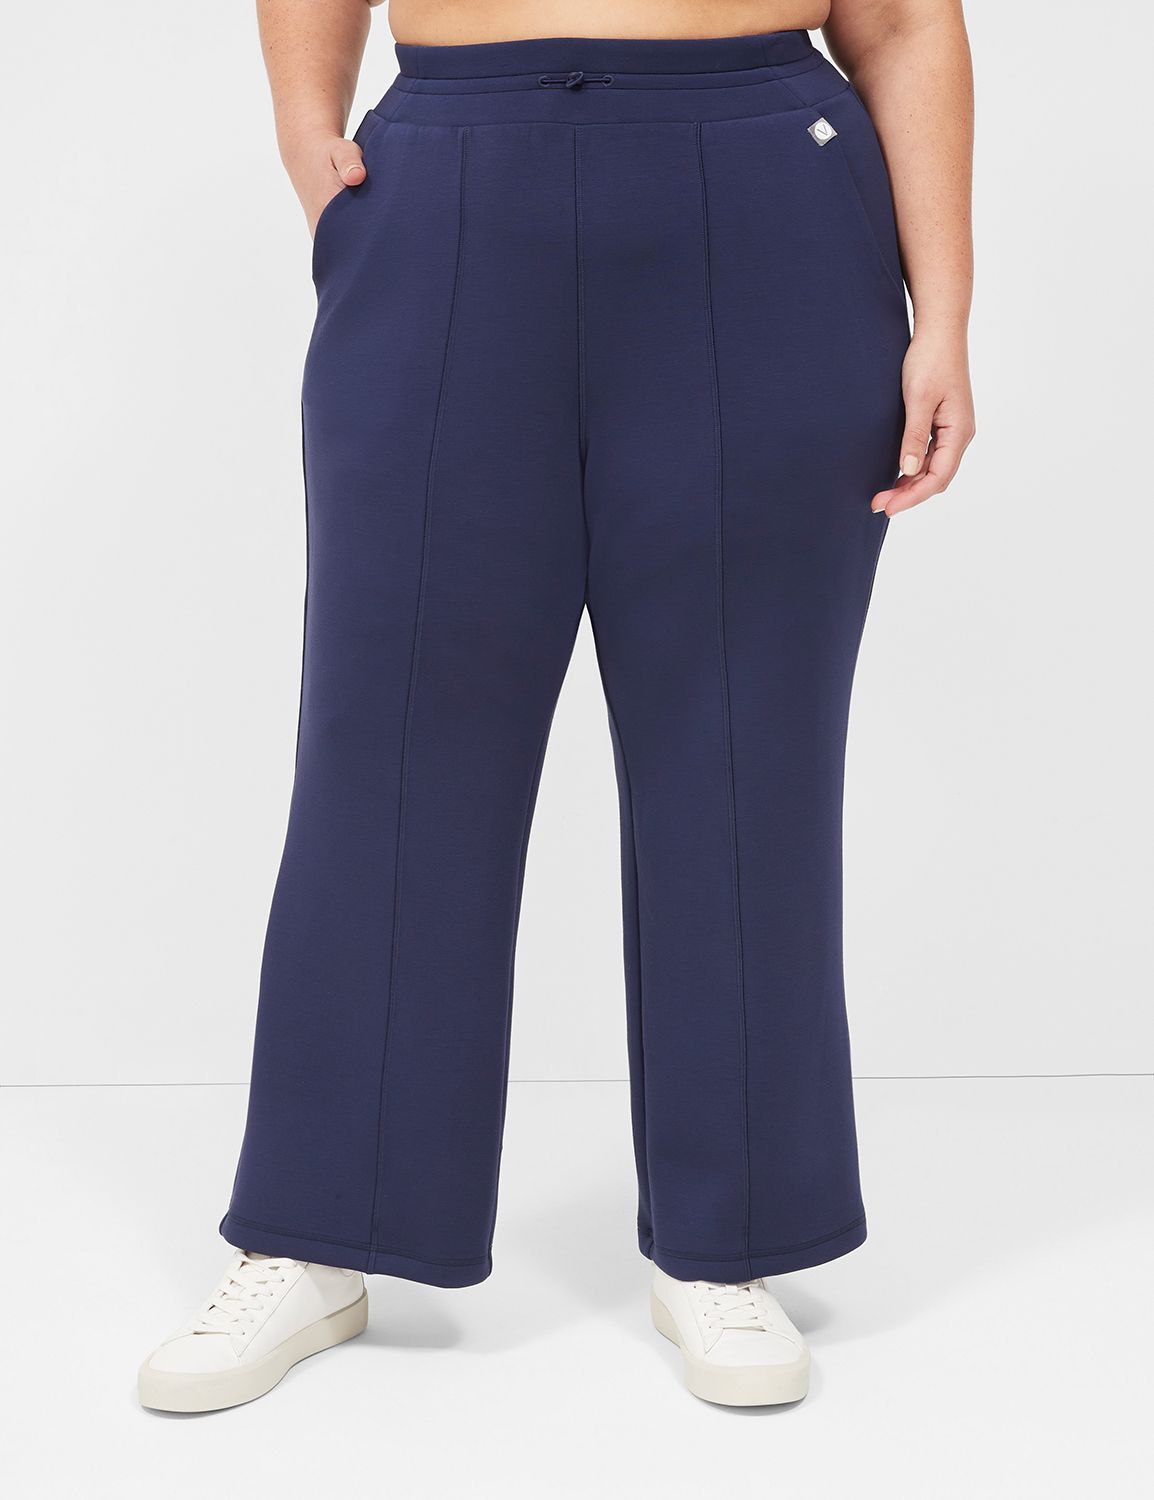  Sweatpants for Women Plus Size Baggy High Waisted